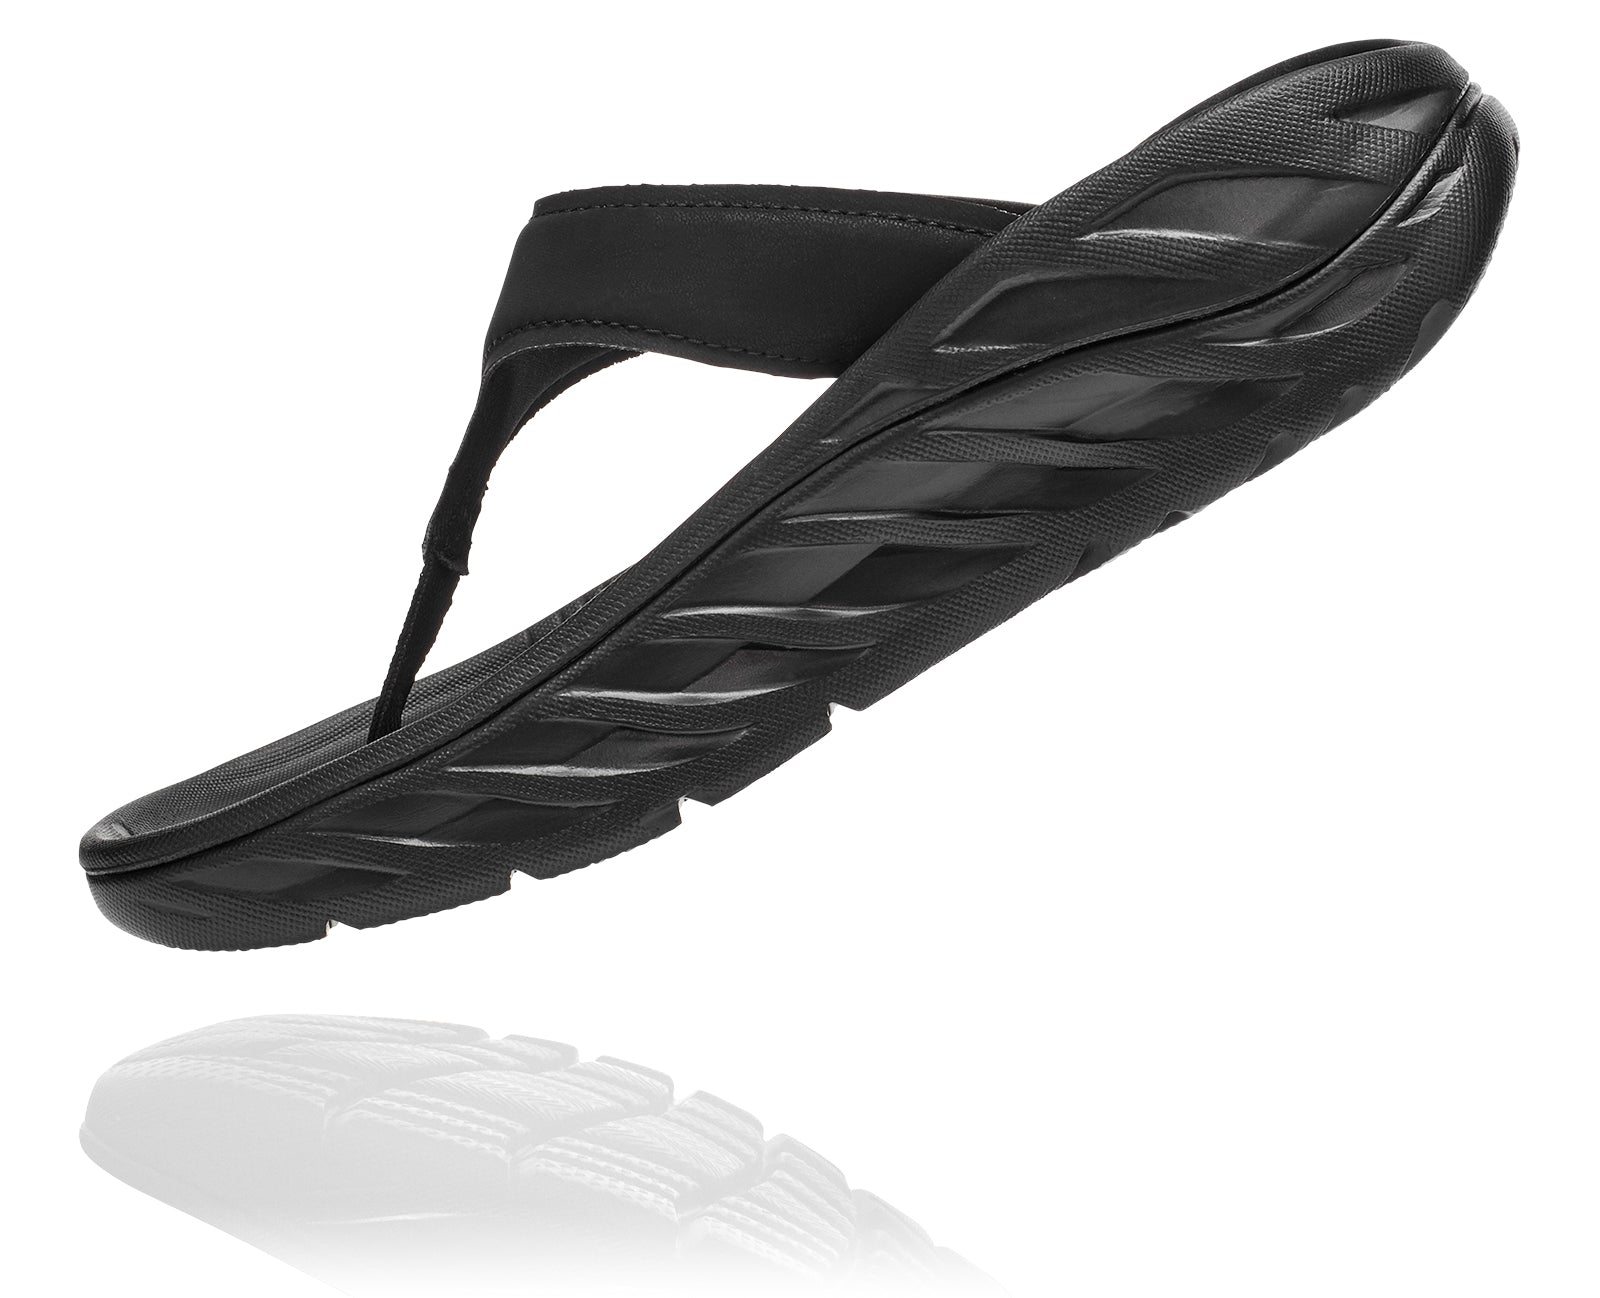 Angled medial view of the Women's HOKA Ora Recovery Flip in the color Black/Dark Gull Gray